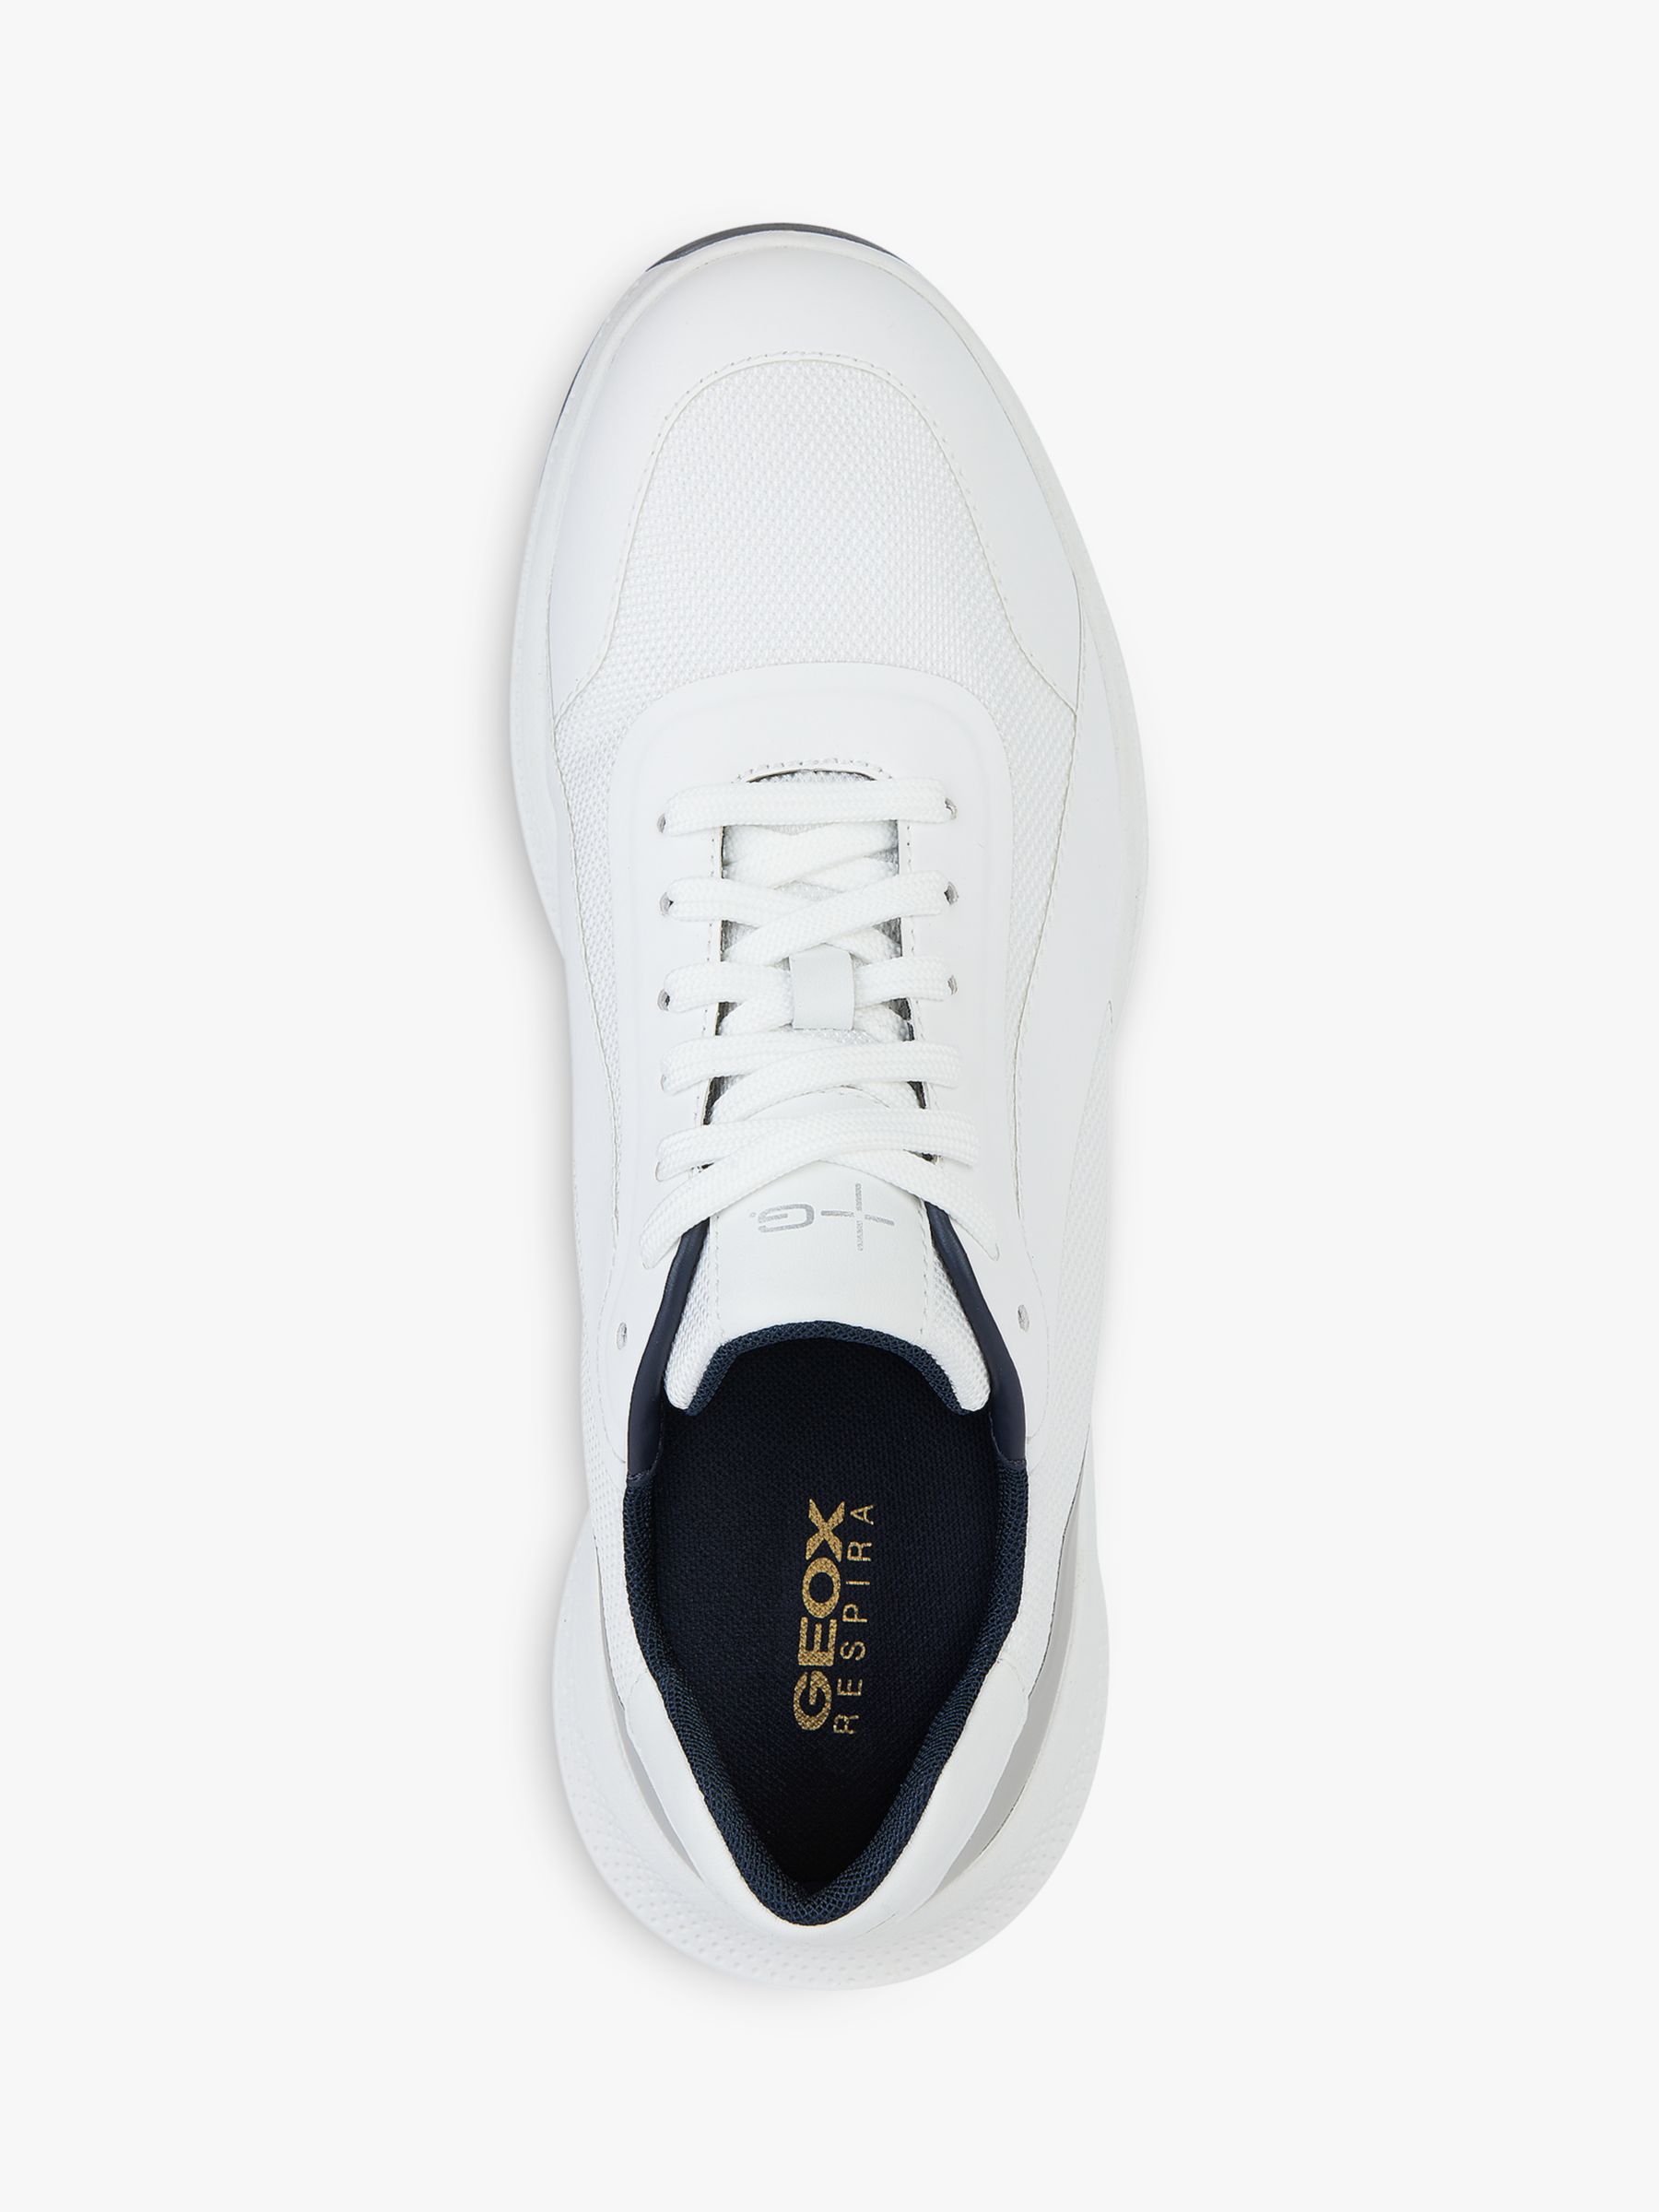 Buy Geox PG1X B Trainers Online at johnlewis.com